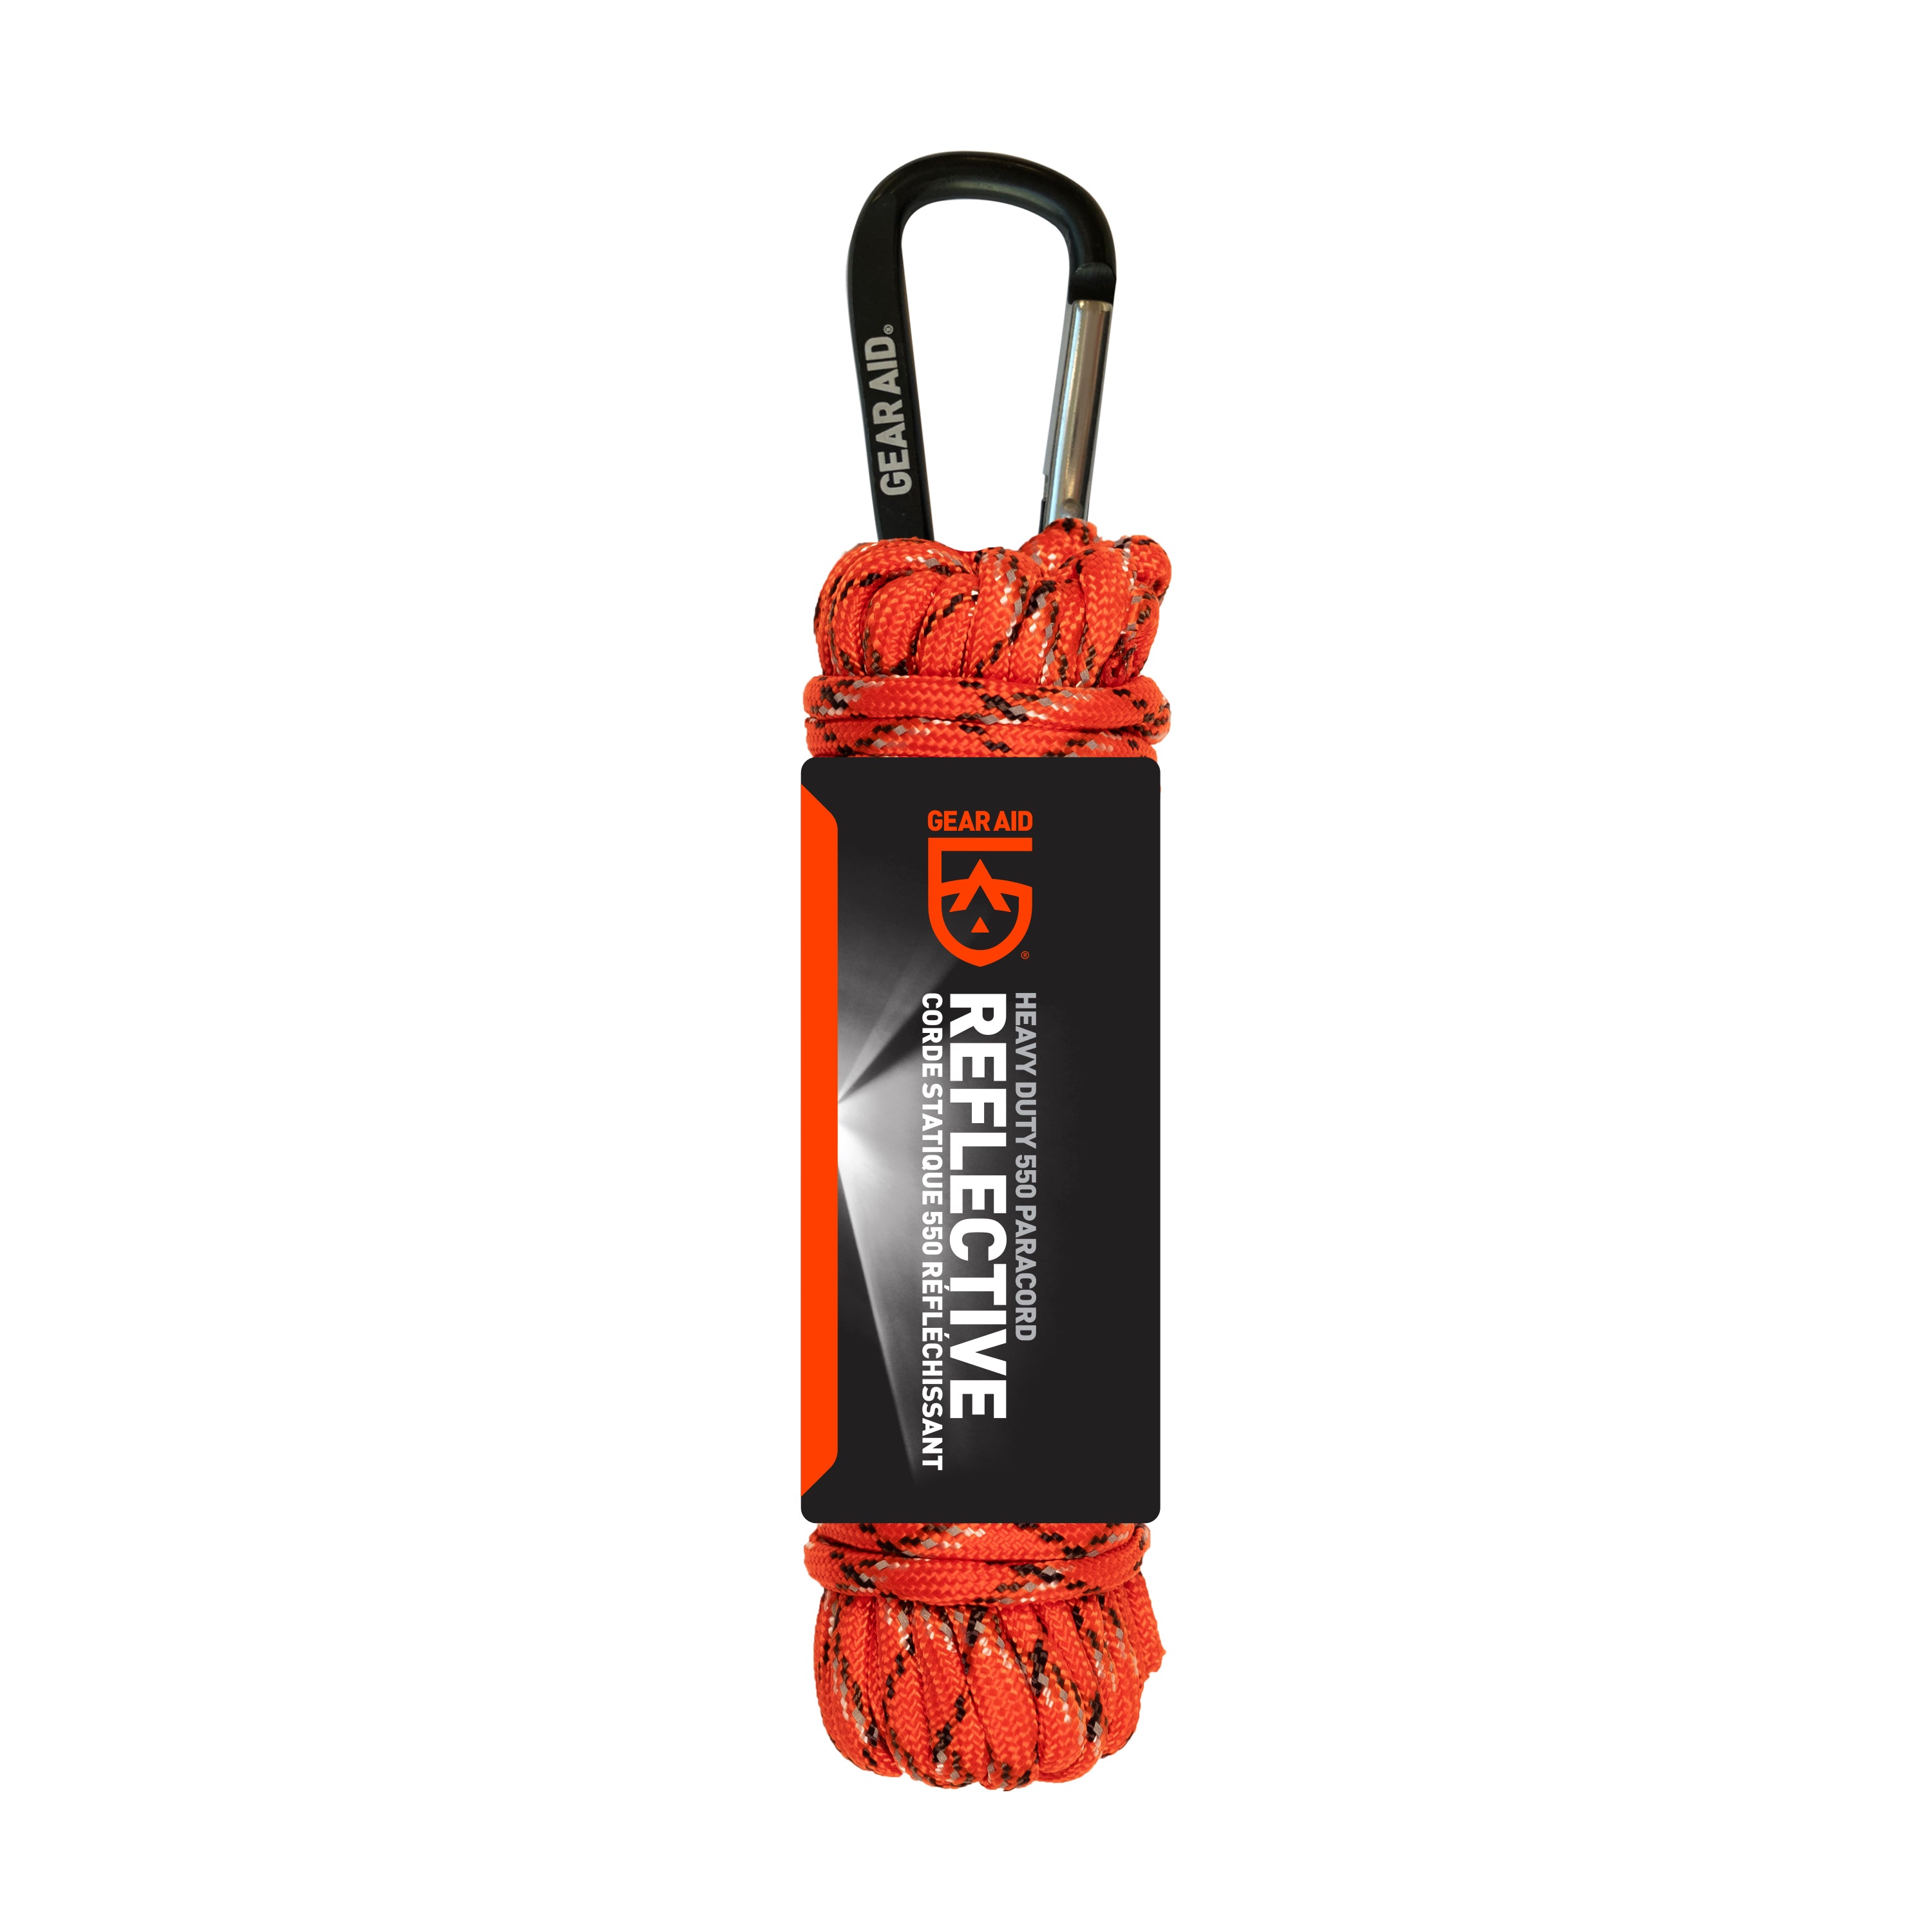 Reflective Paracord Cord 30M Length, 6mm Thickness, Ideal For